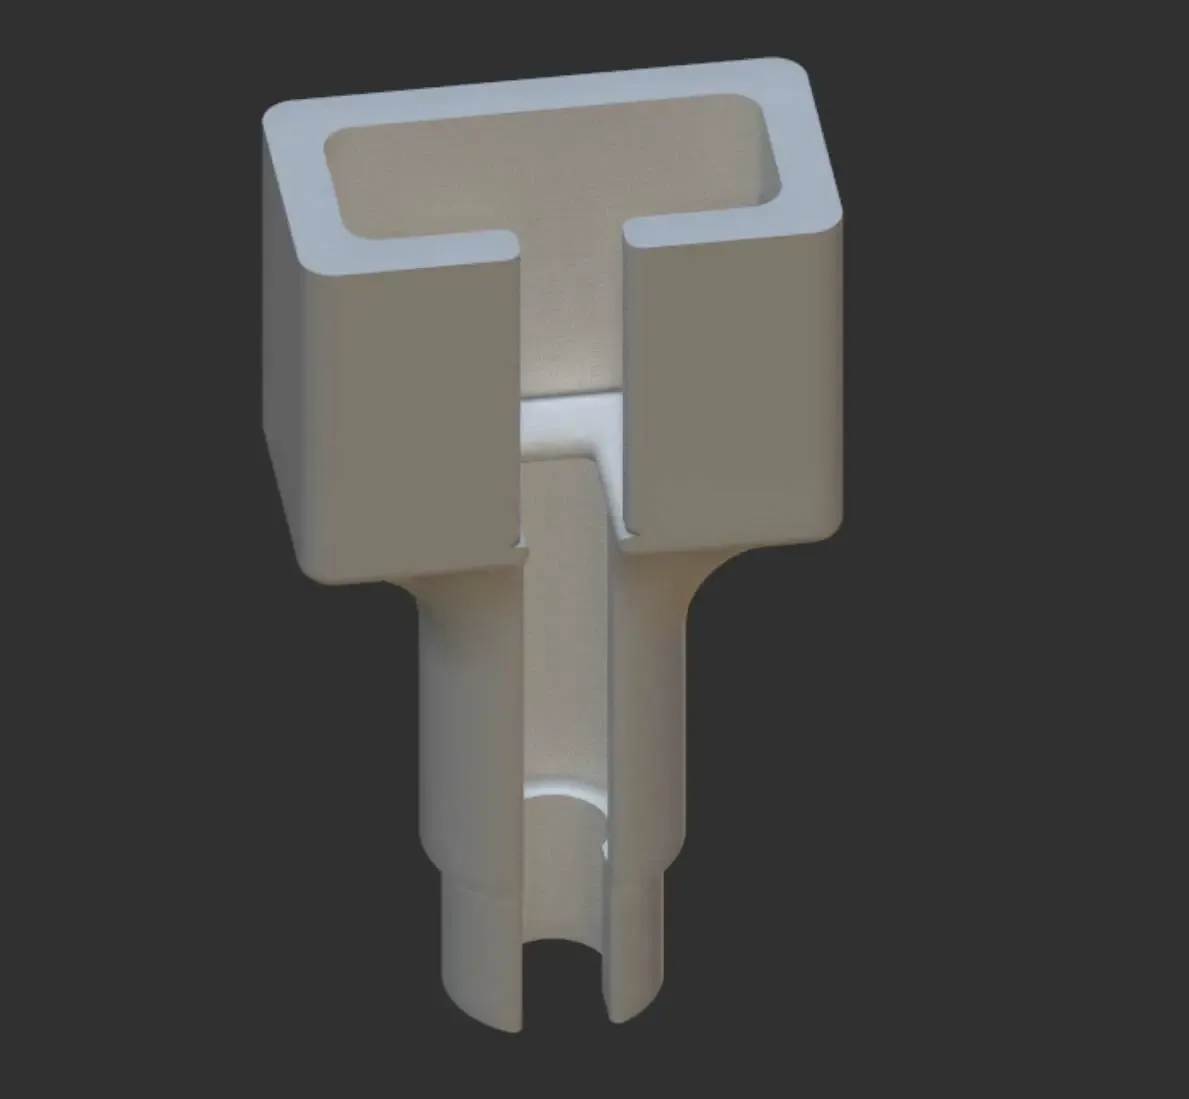 Charging cable protector 01